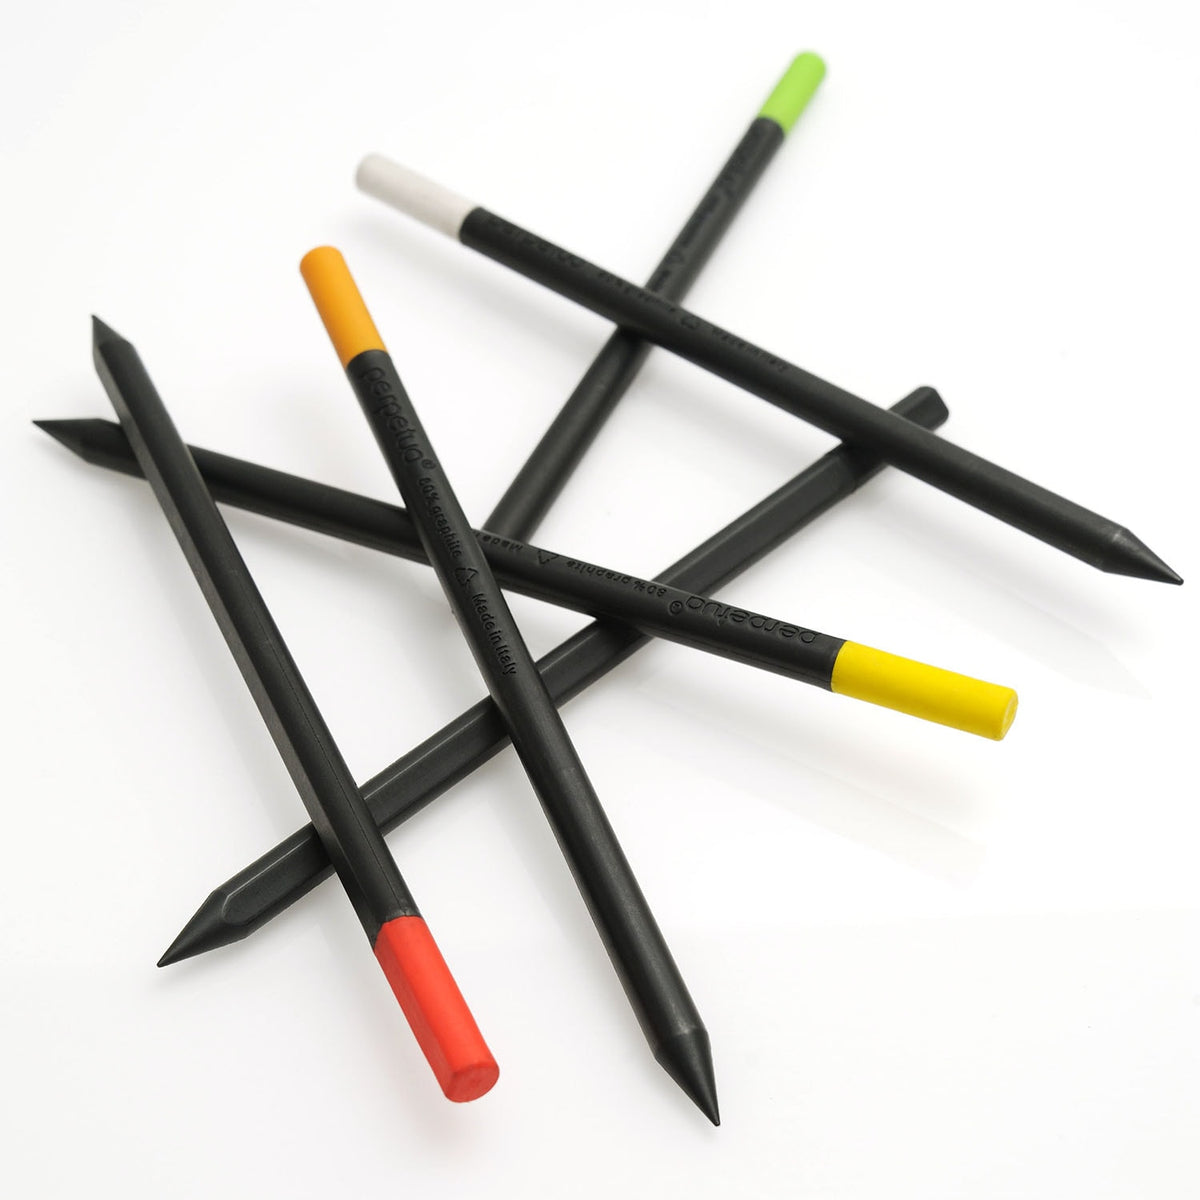 Forever Graphite Pencils from Chili Concept - Sourcing City News